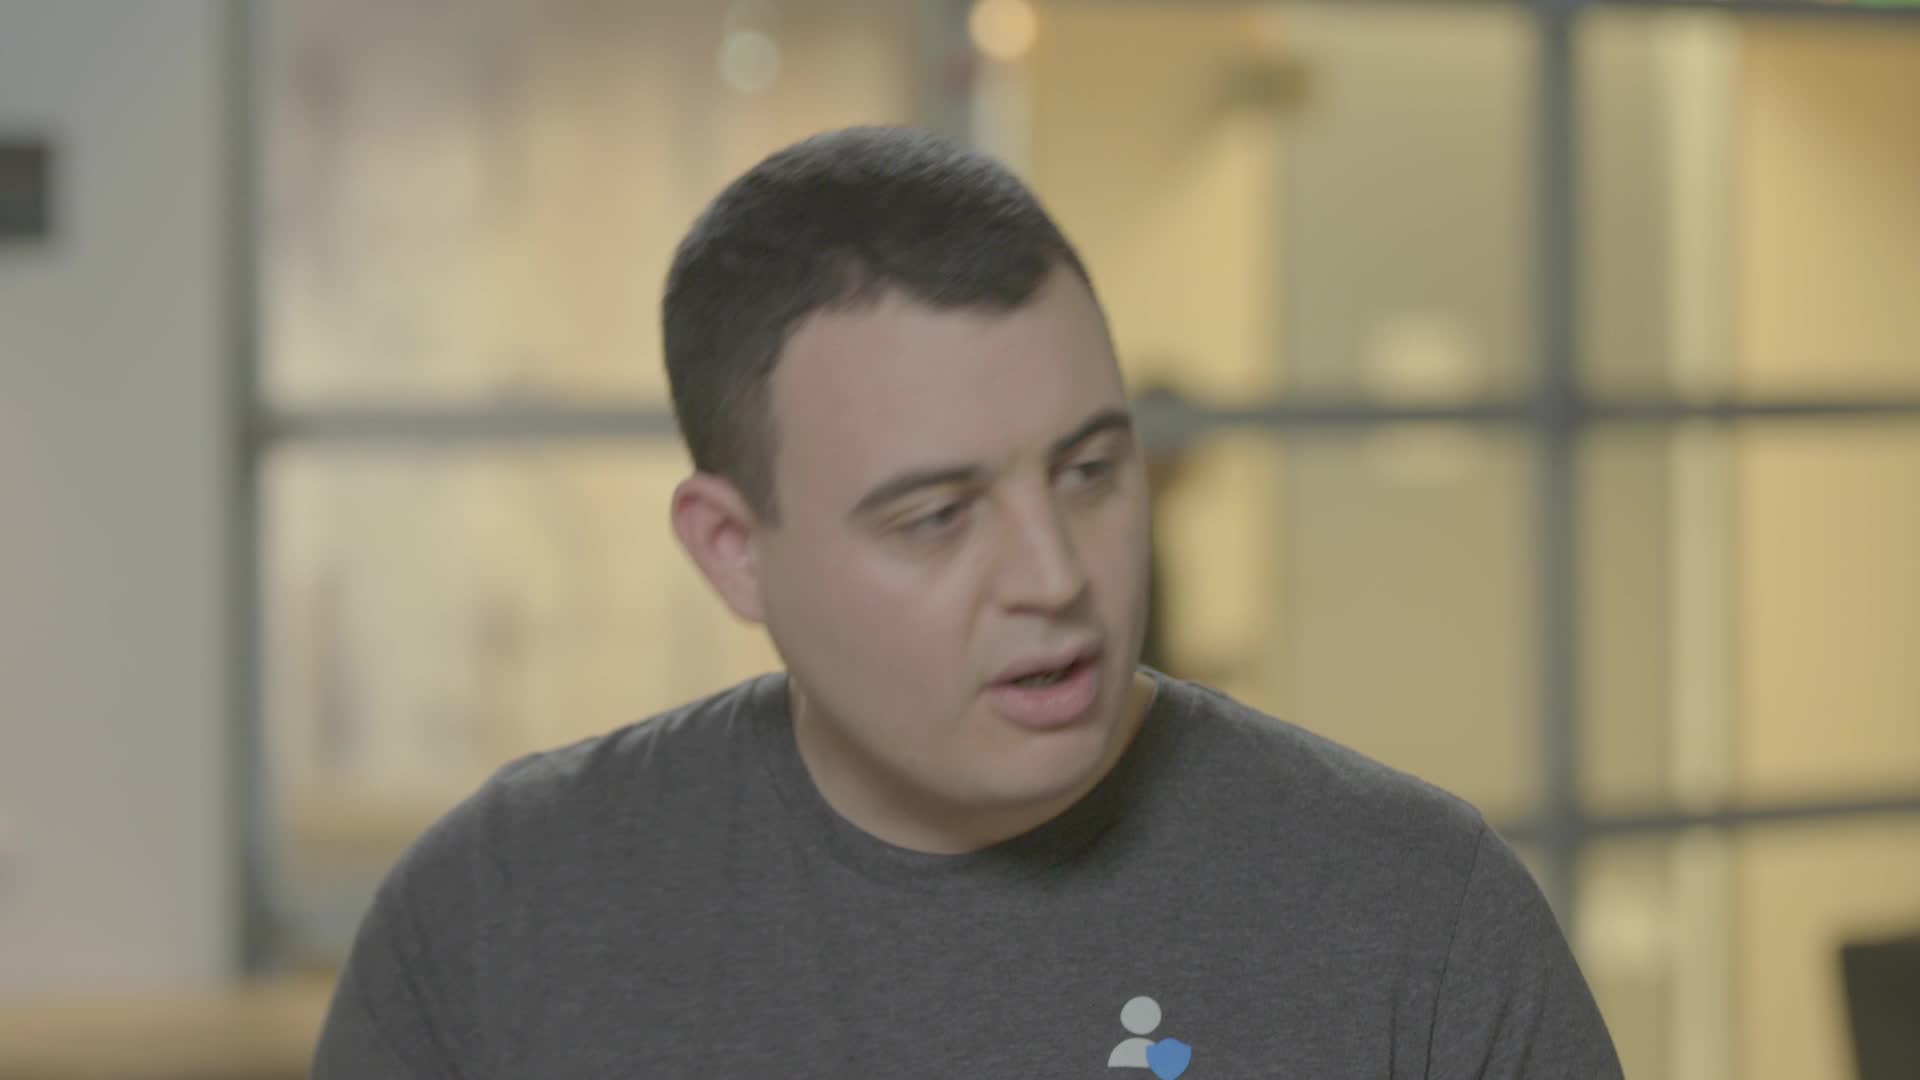 Still image from video showing Dustin, General Manager for Microsoft Threat Experts.